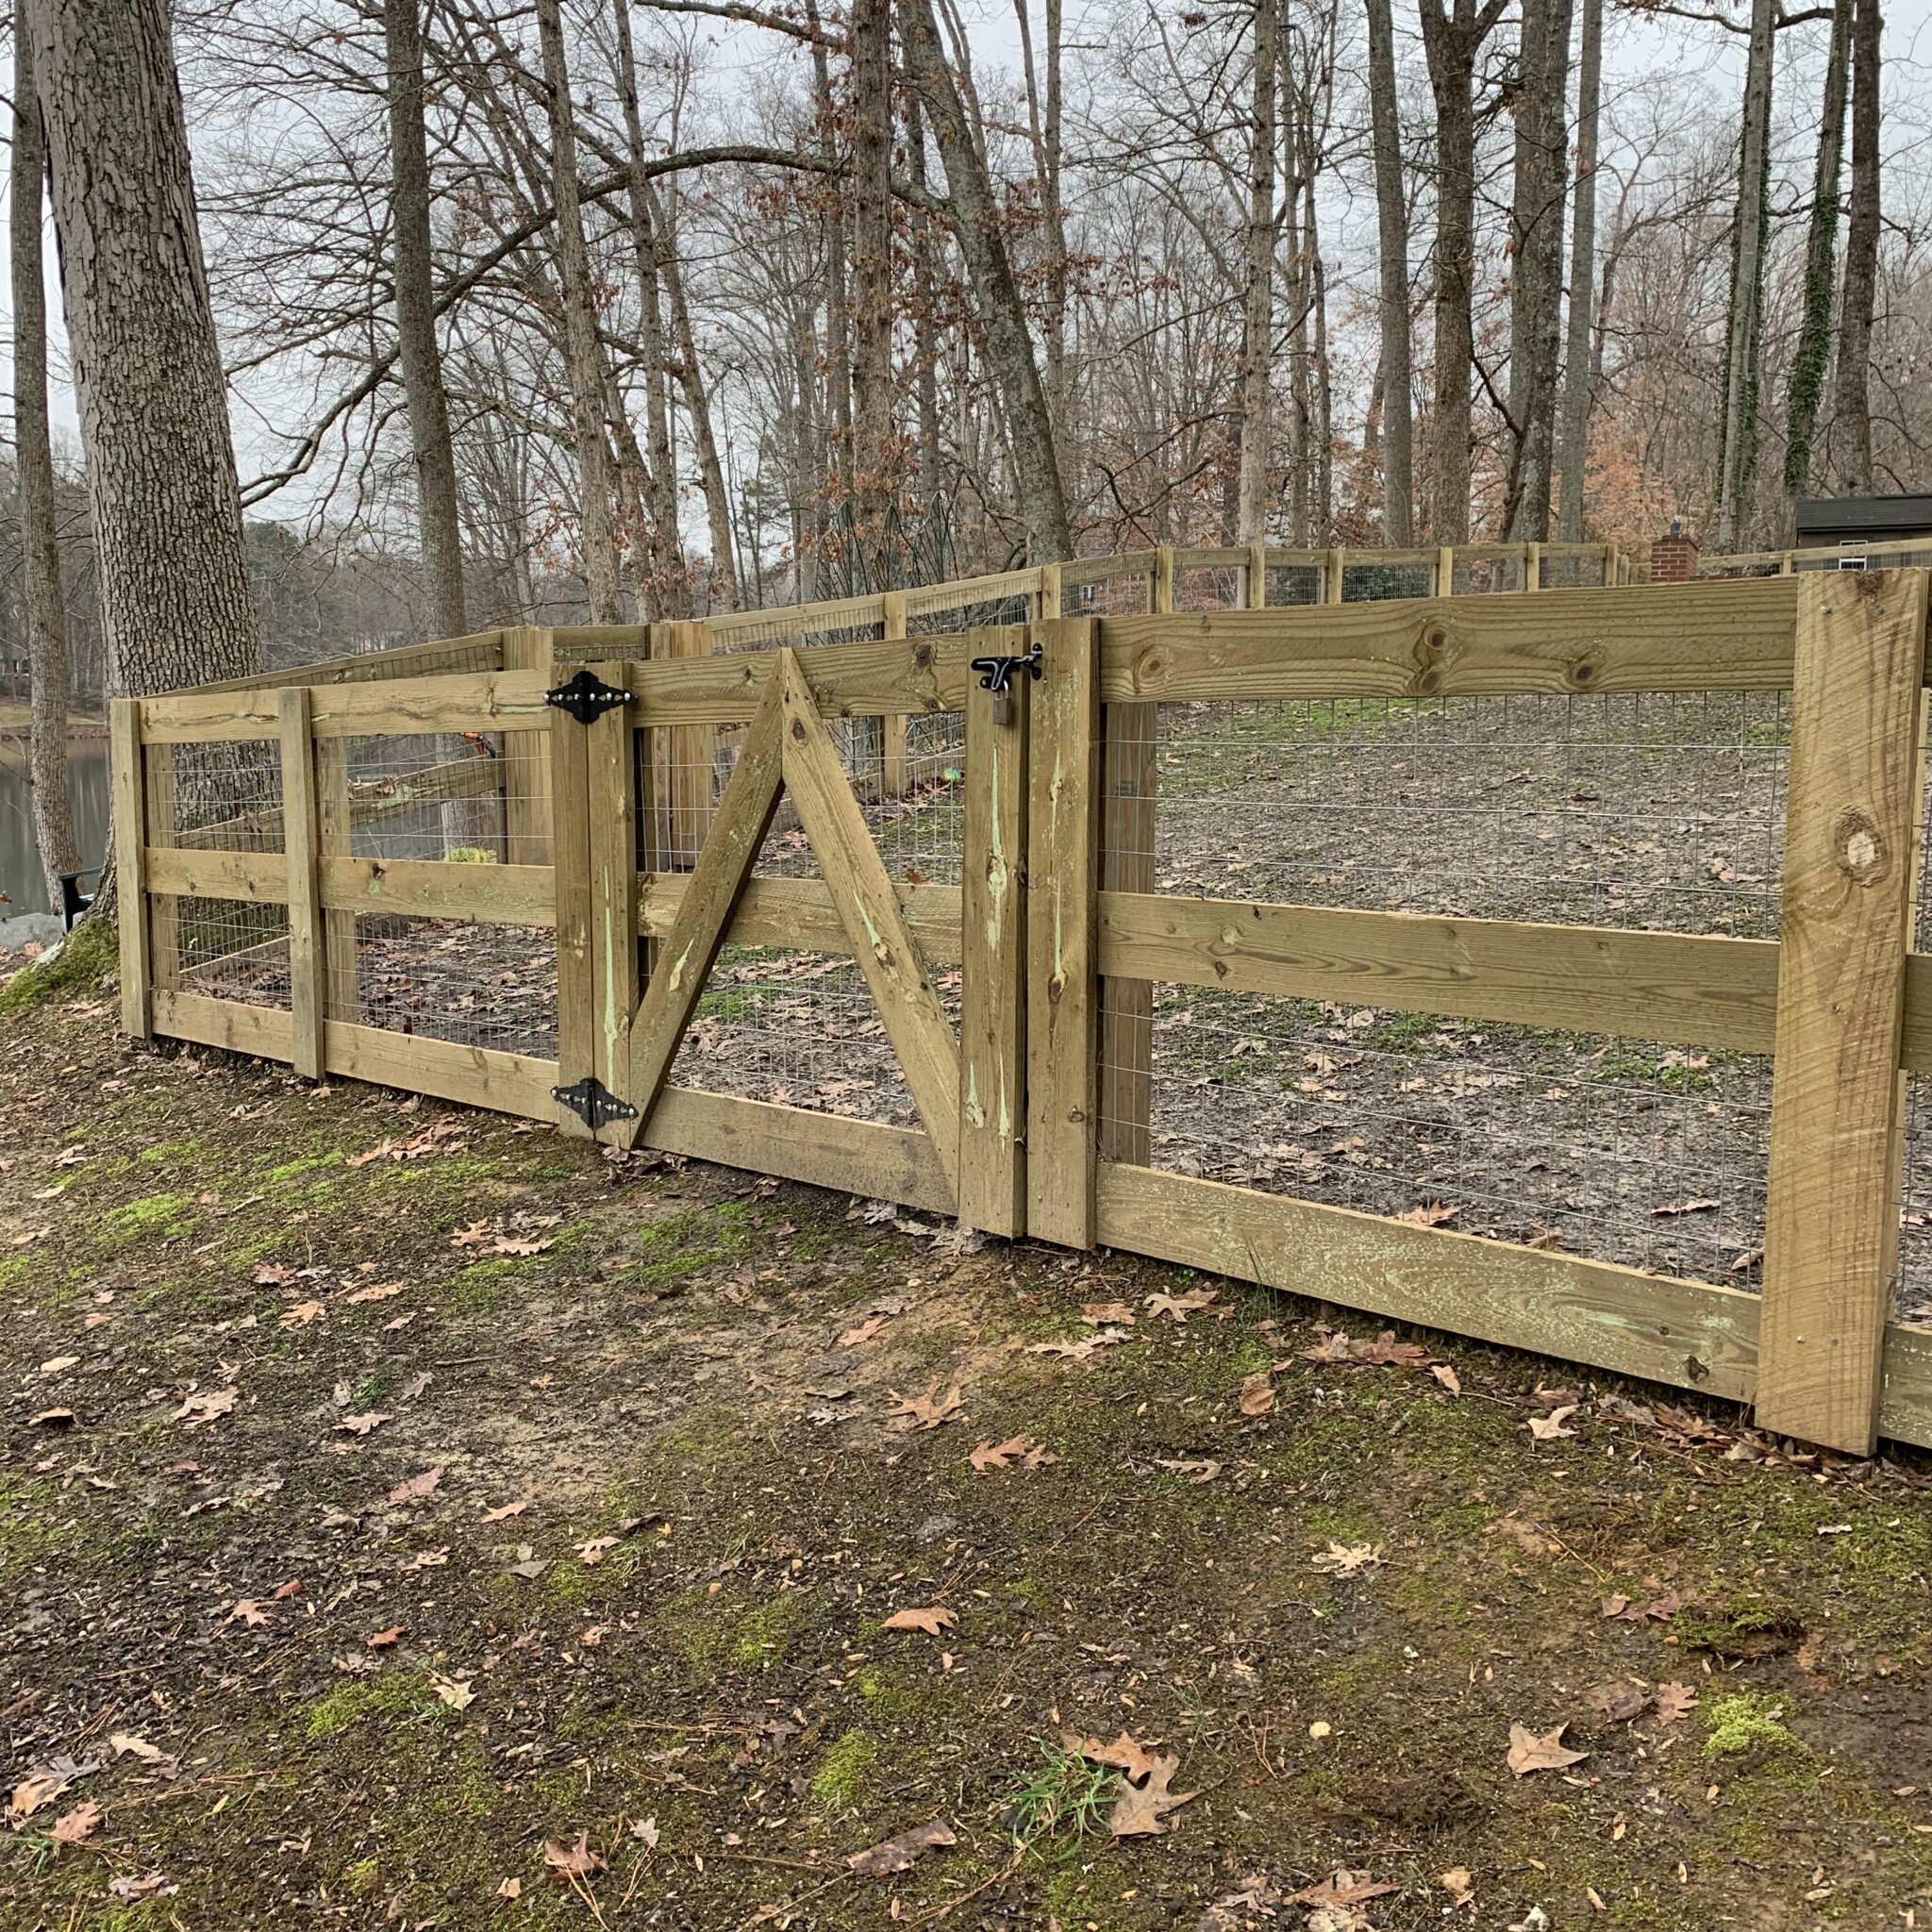 Horizontal board fence secured with welded wire and a locking gate.